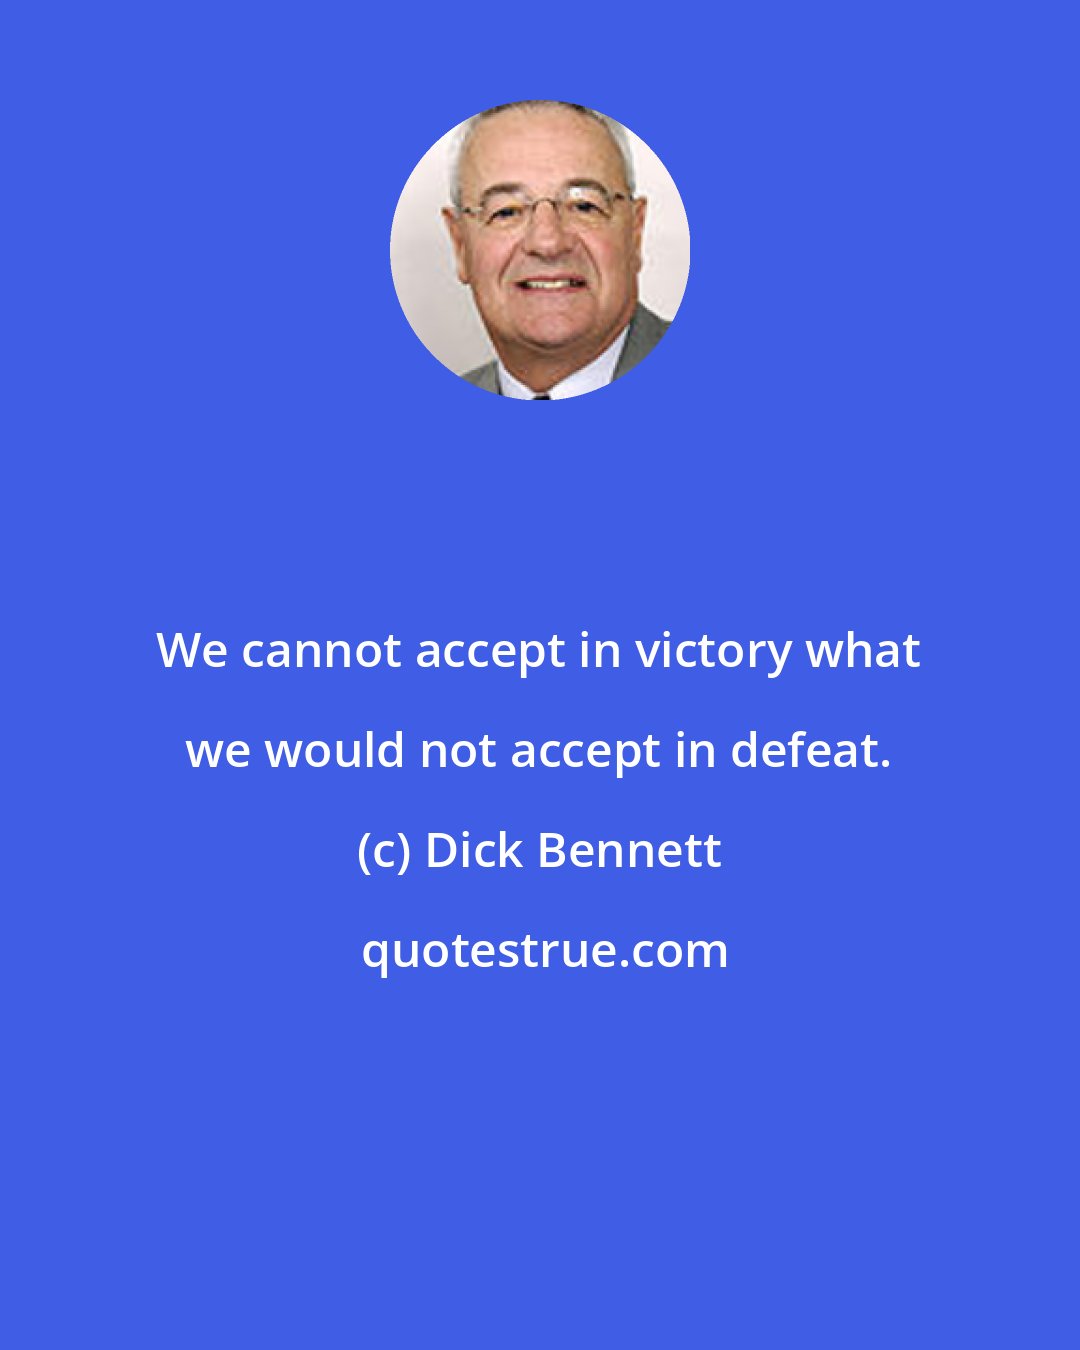 Dick Bennett: We cannot accept in victory what we would not accept in defeat.